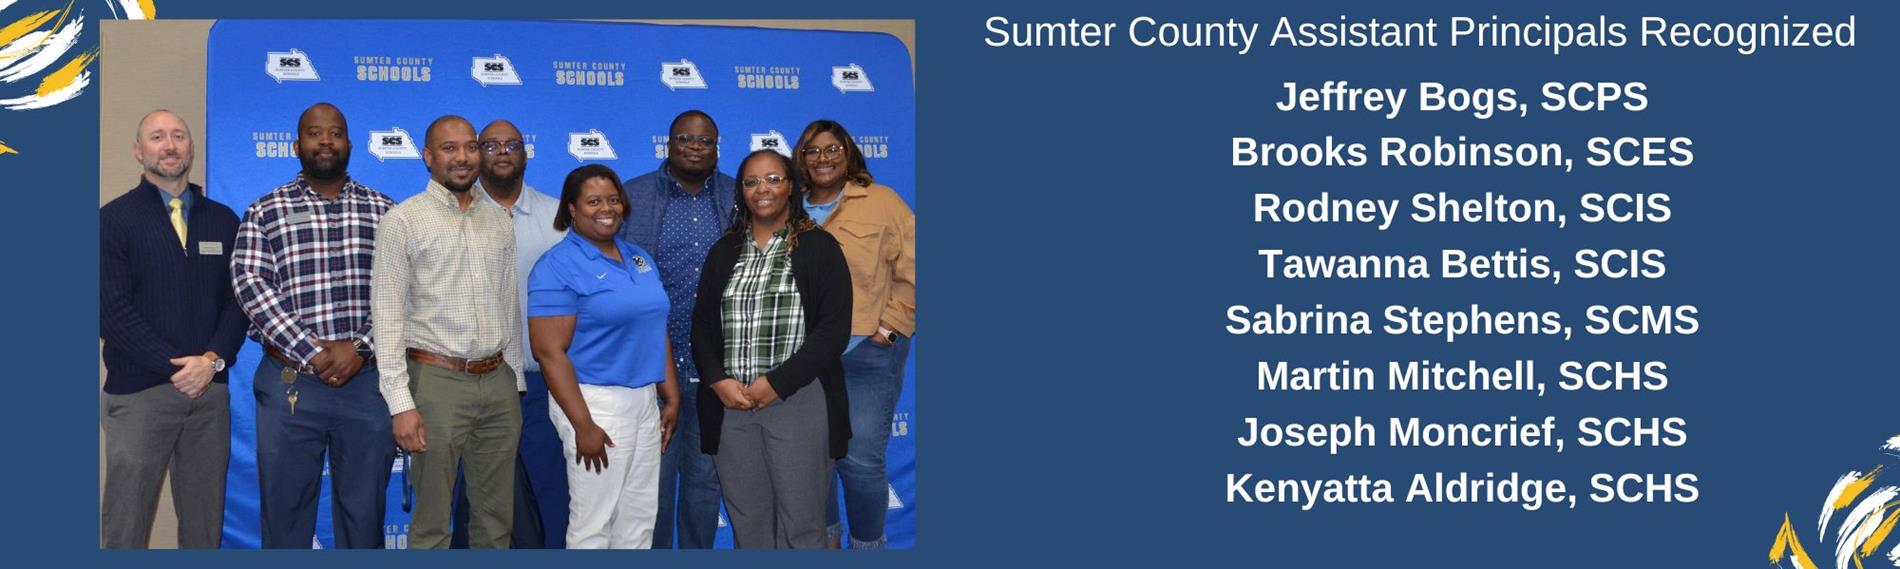 Sumter County Assistant Principals Recognized